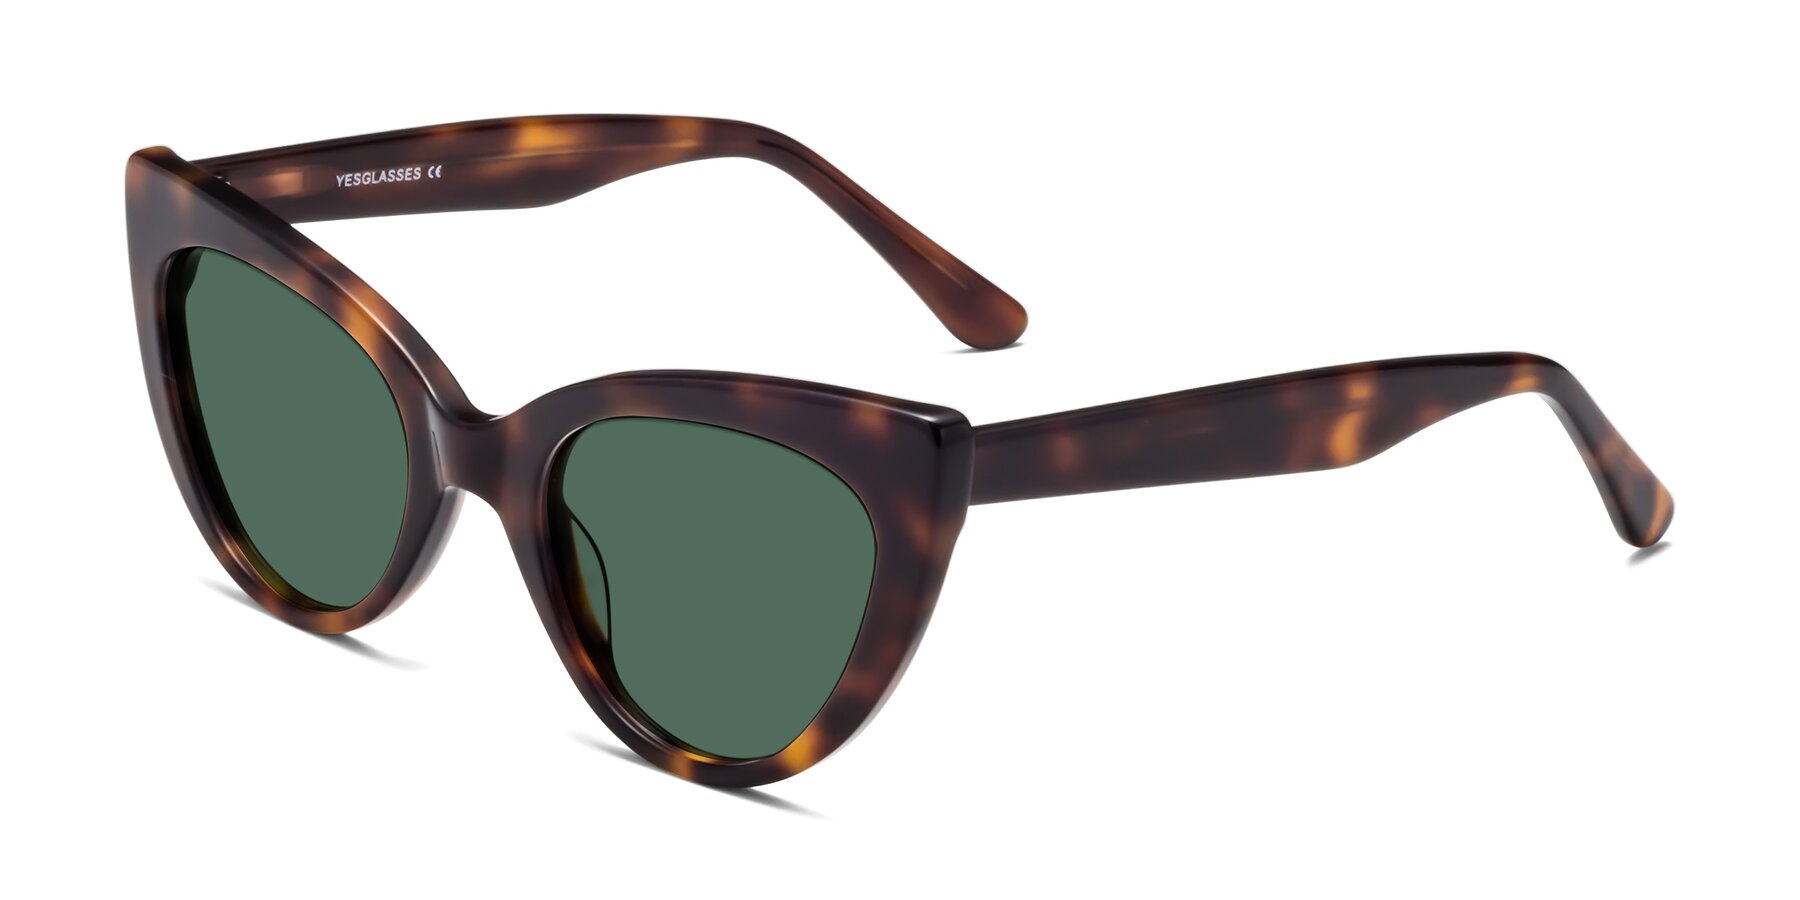 Angle of Tiesi in Tortoise with Green Polarized Lenses